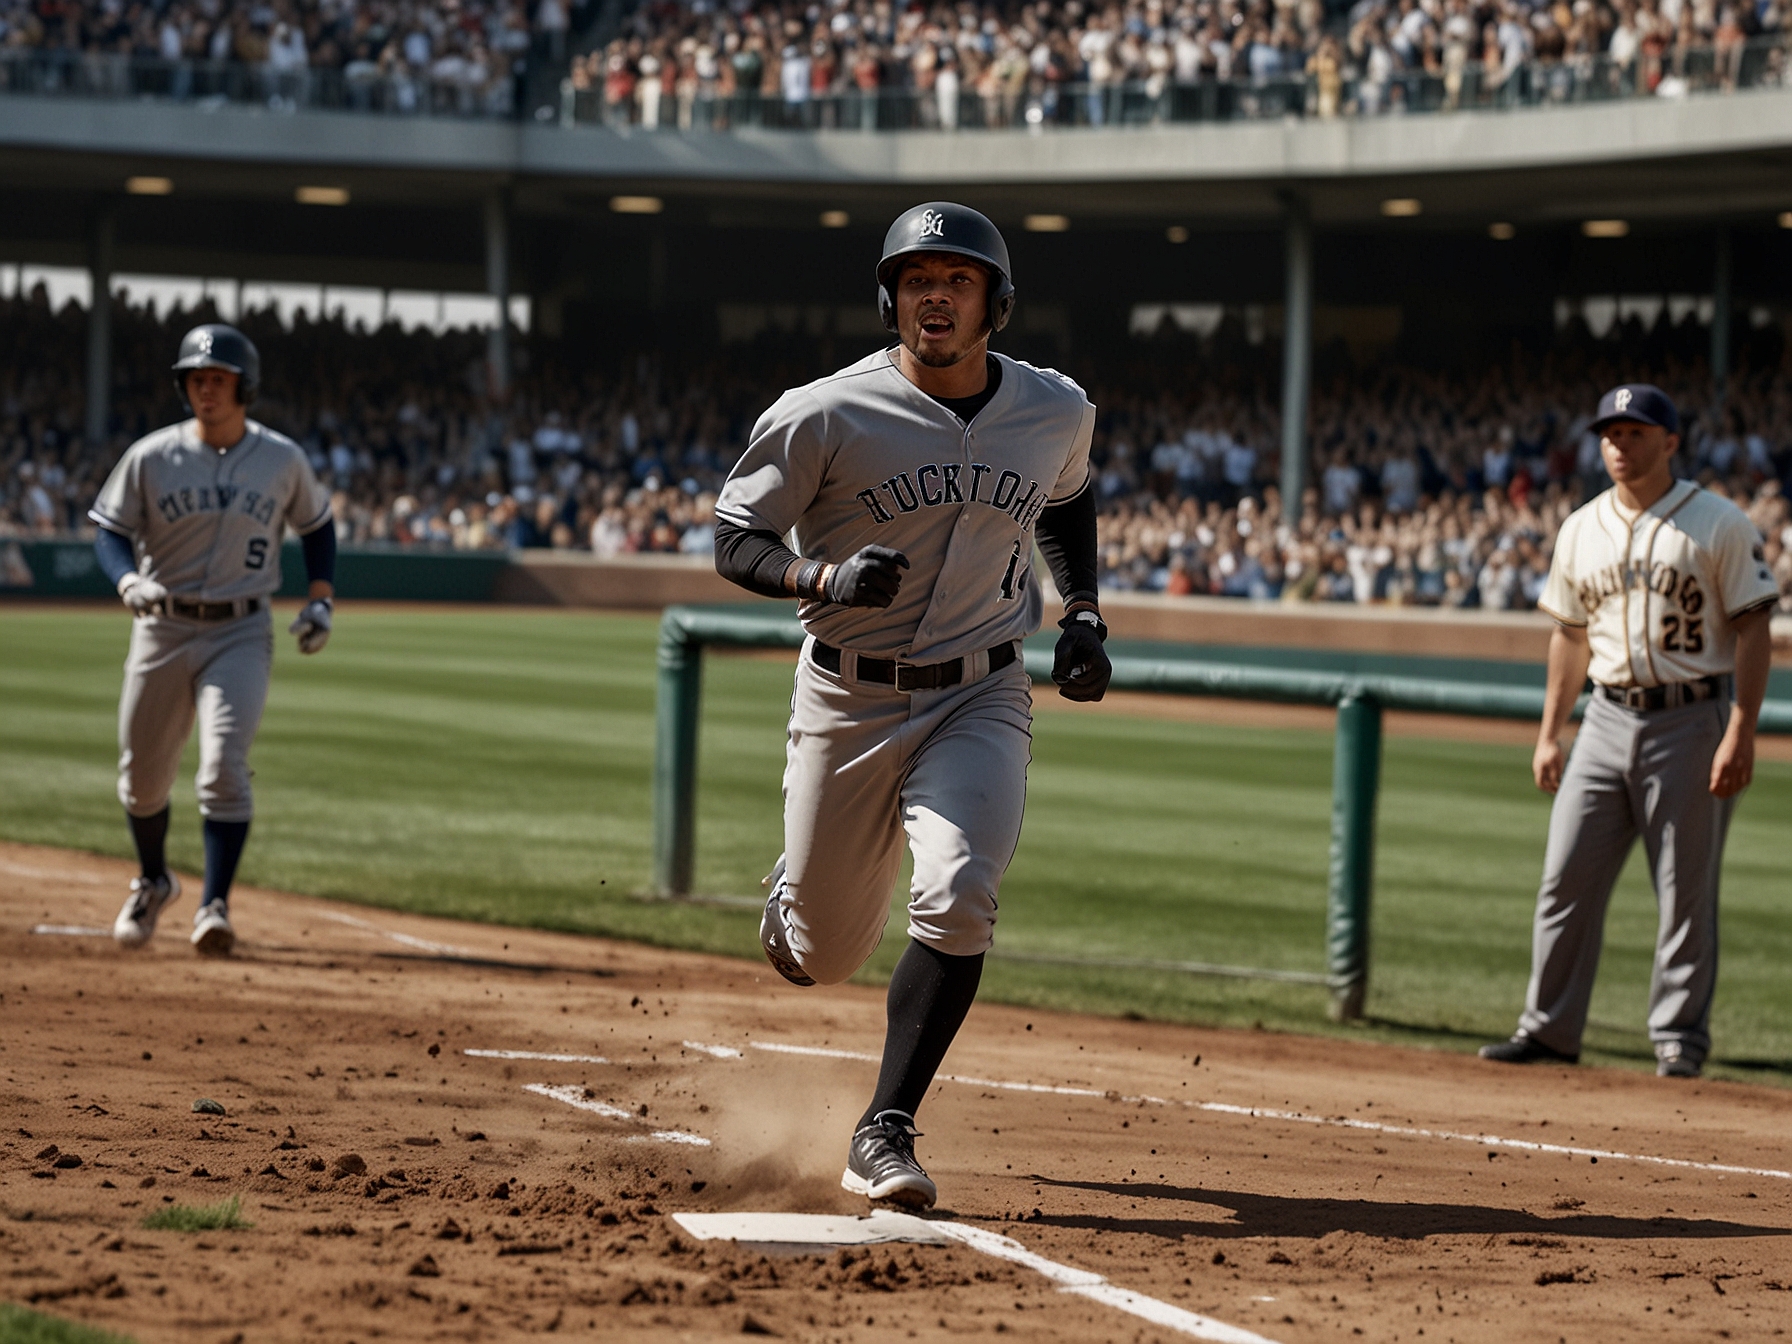 Image showing Jackson Chourio rounding third base in his inside-the-park home run, capturing the excitement and speed as he races to complete this rare feat while the crowd cheers.